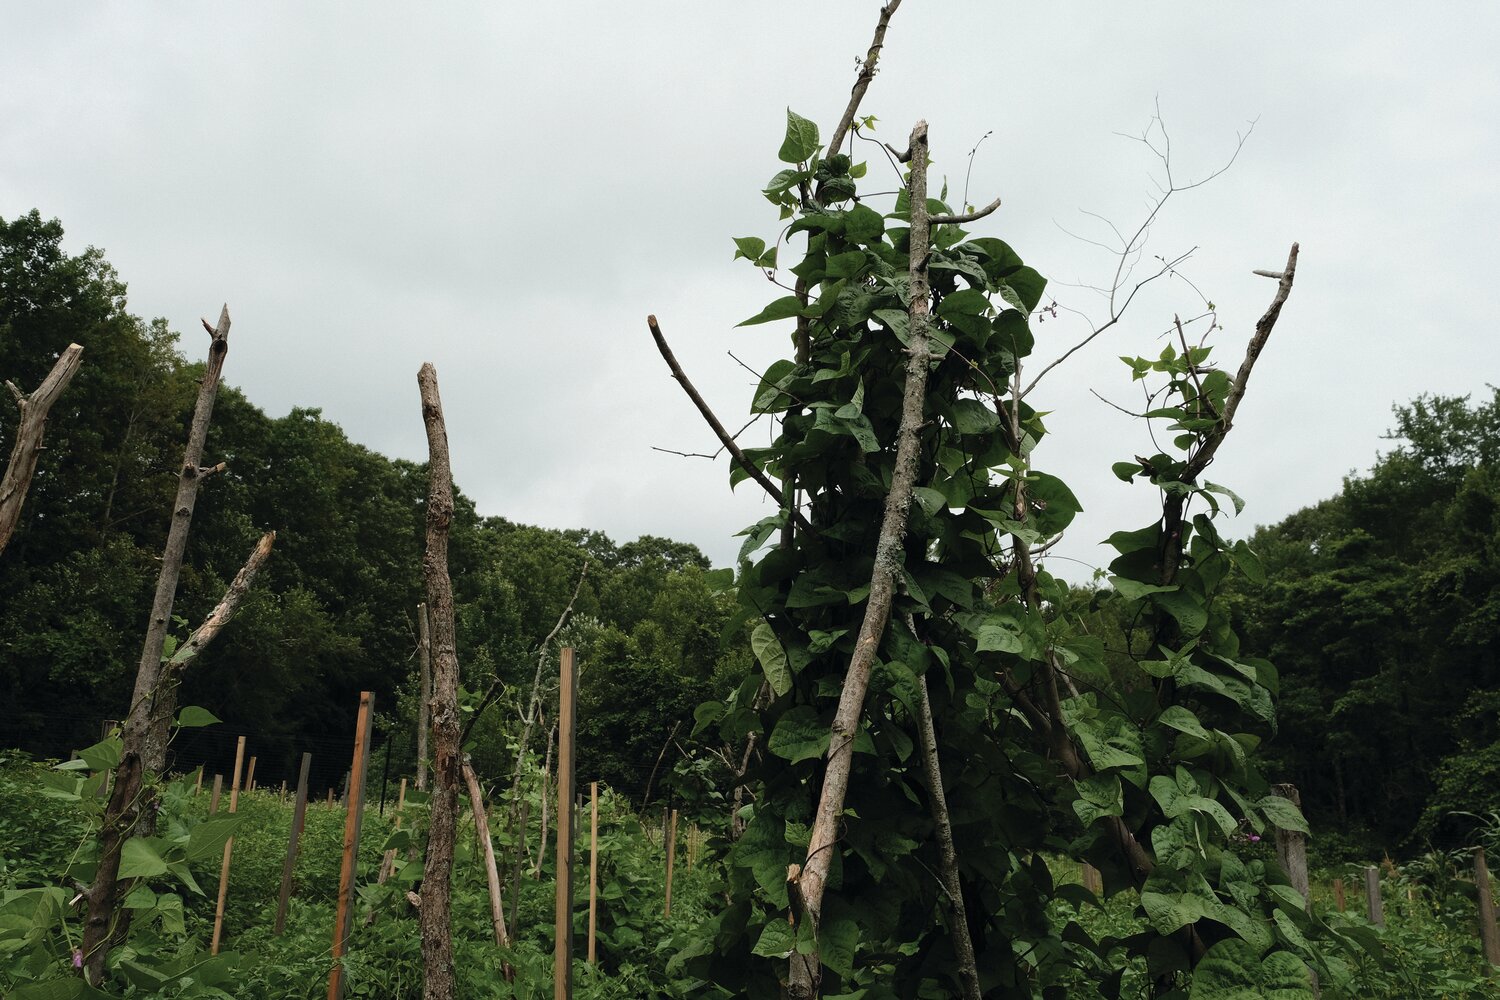 HIGH STAKES: Bean stalks are propped up with stakes and cut branches. Beans and low-plants like squash are often planted together at the farm, and have a symbiotic relationship.